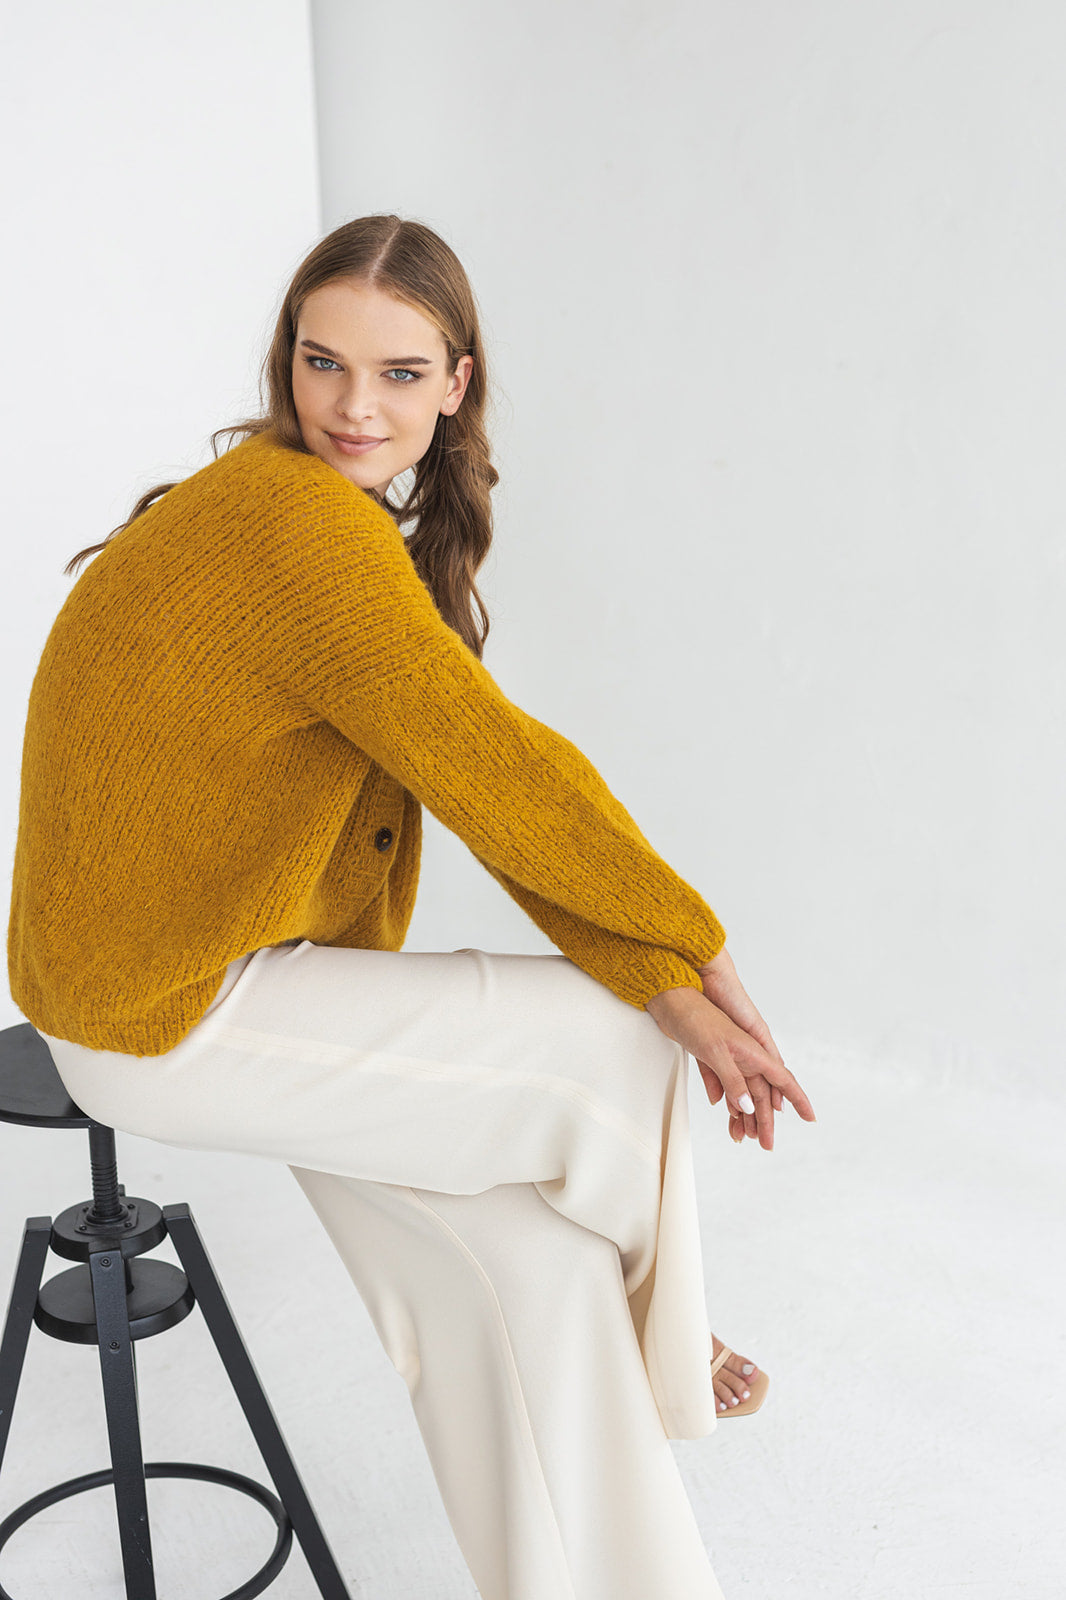 Mustard Yellow Alpaca Wool Cardigan With Buttons, Curry Cable Knit Lightweight Sweater, Slightly Oversized Minimalist Classy Women Gilet